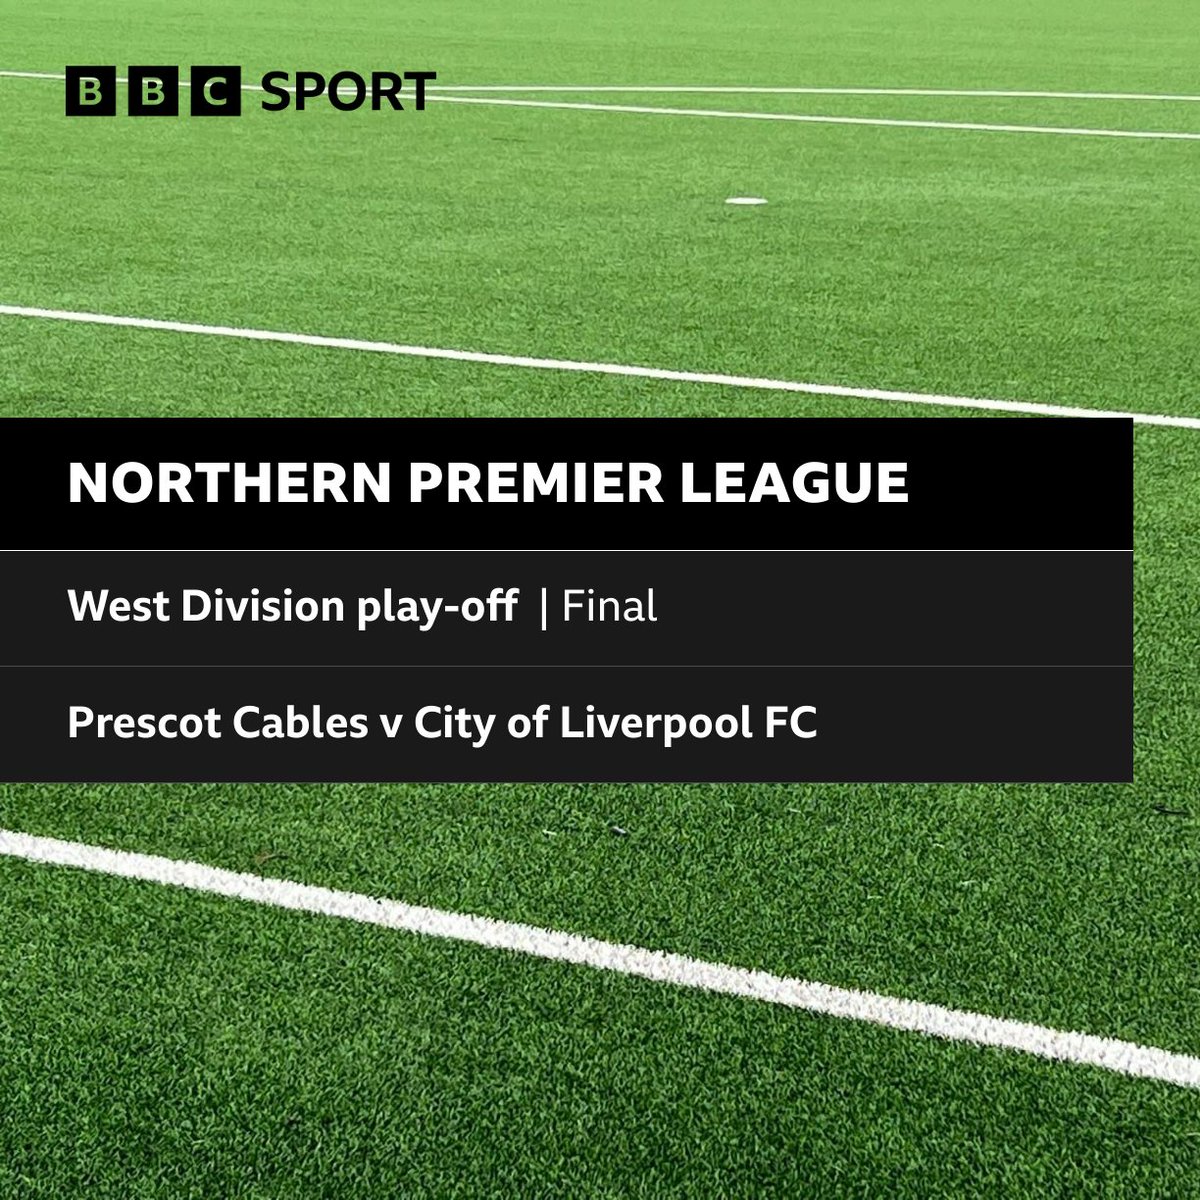 ⚽️ There is one local non-league match this afternoon and it's a big one in the @NorthernPremLge as @PrescotCablesFC and @CityofLpoolFC face each other in the West Division play-off final

#⃣ #TotalSport